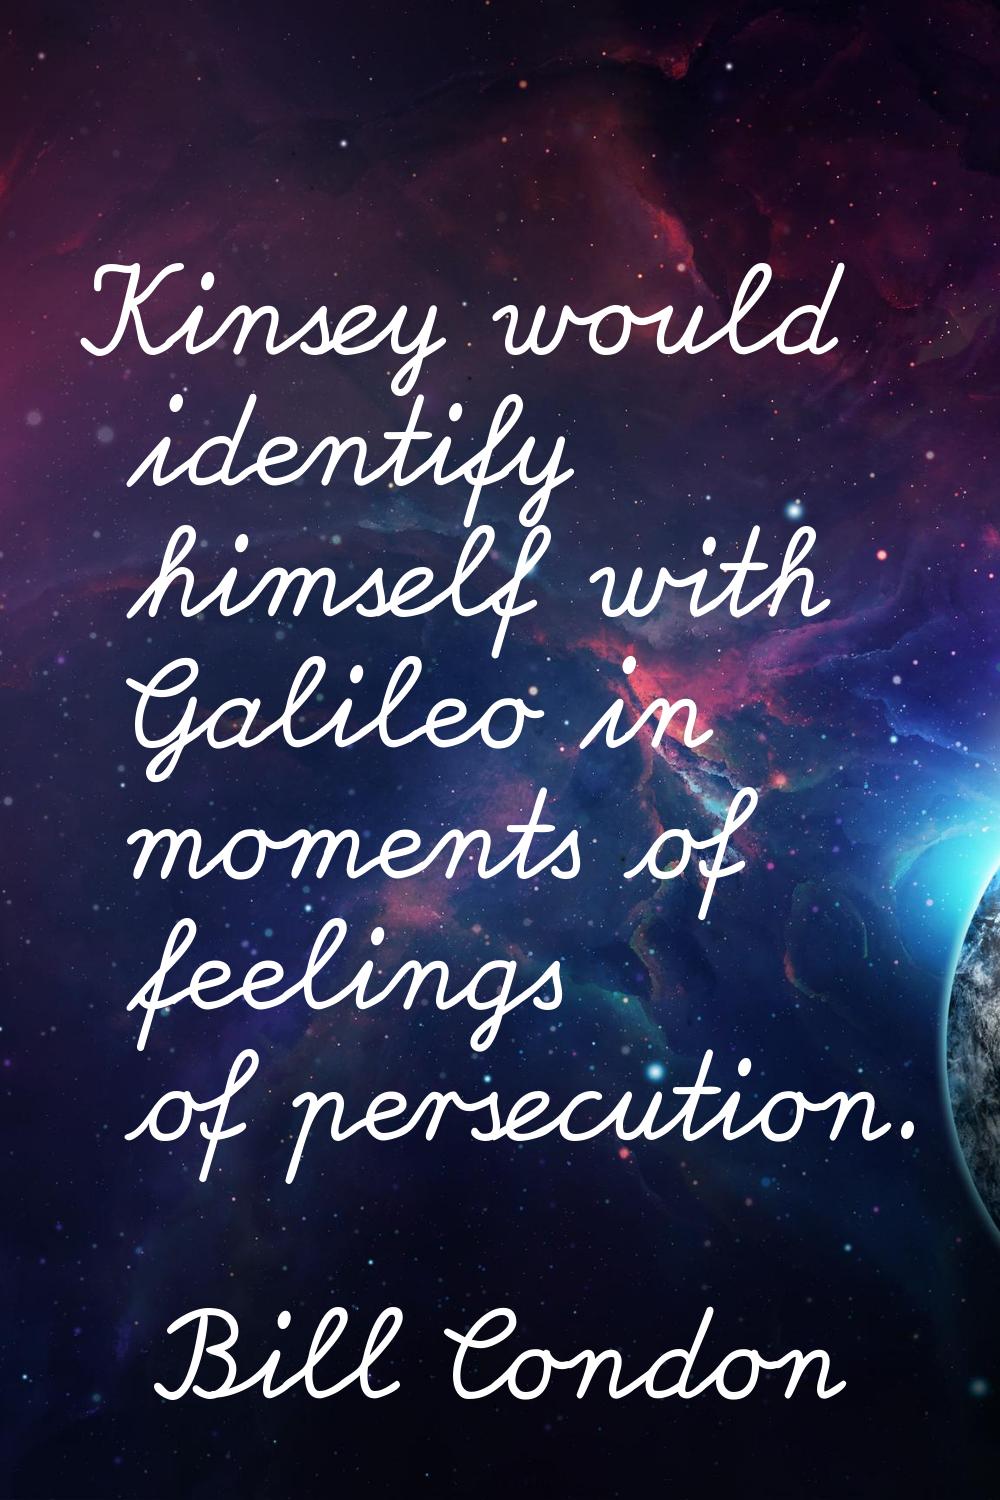 Kinsey would identify himself with Galileo in moments of feelings of persecution.